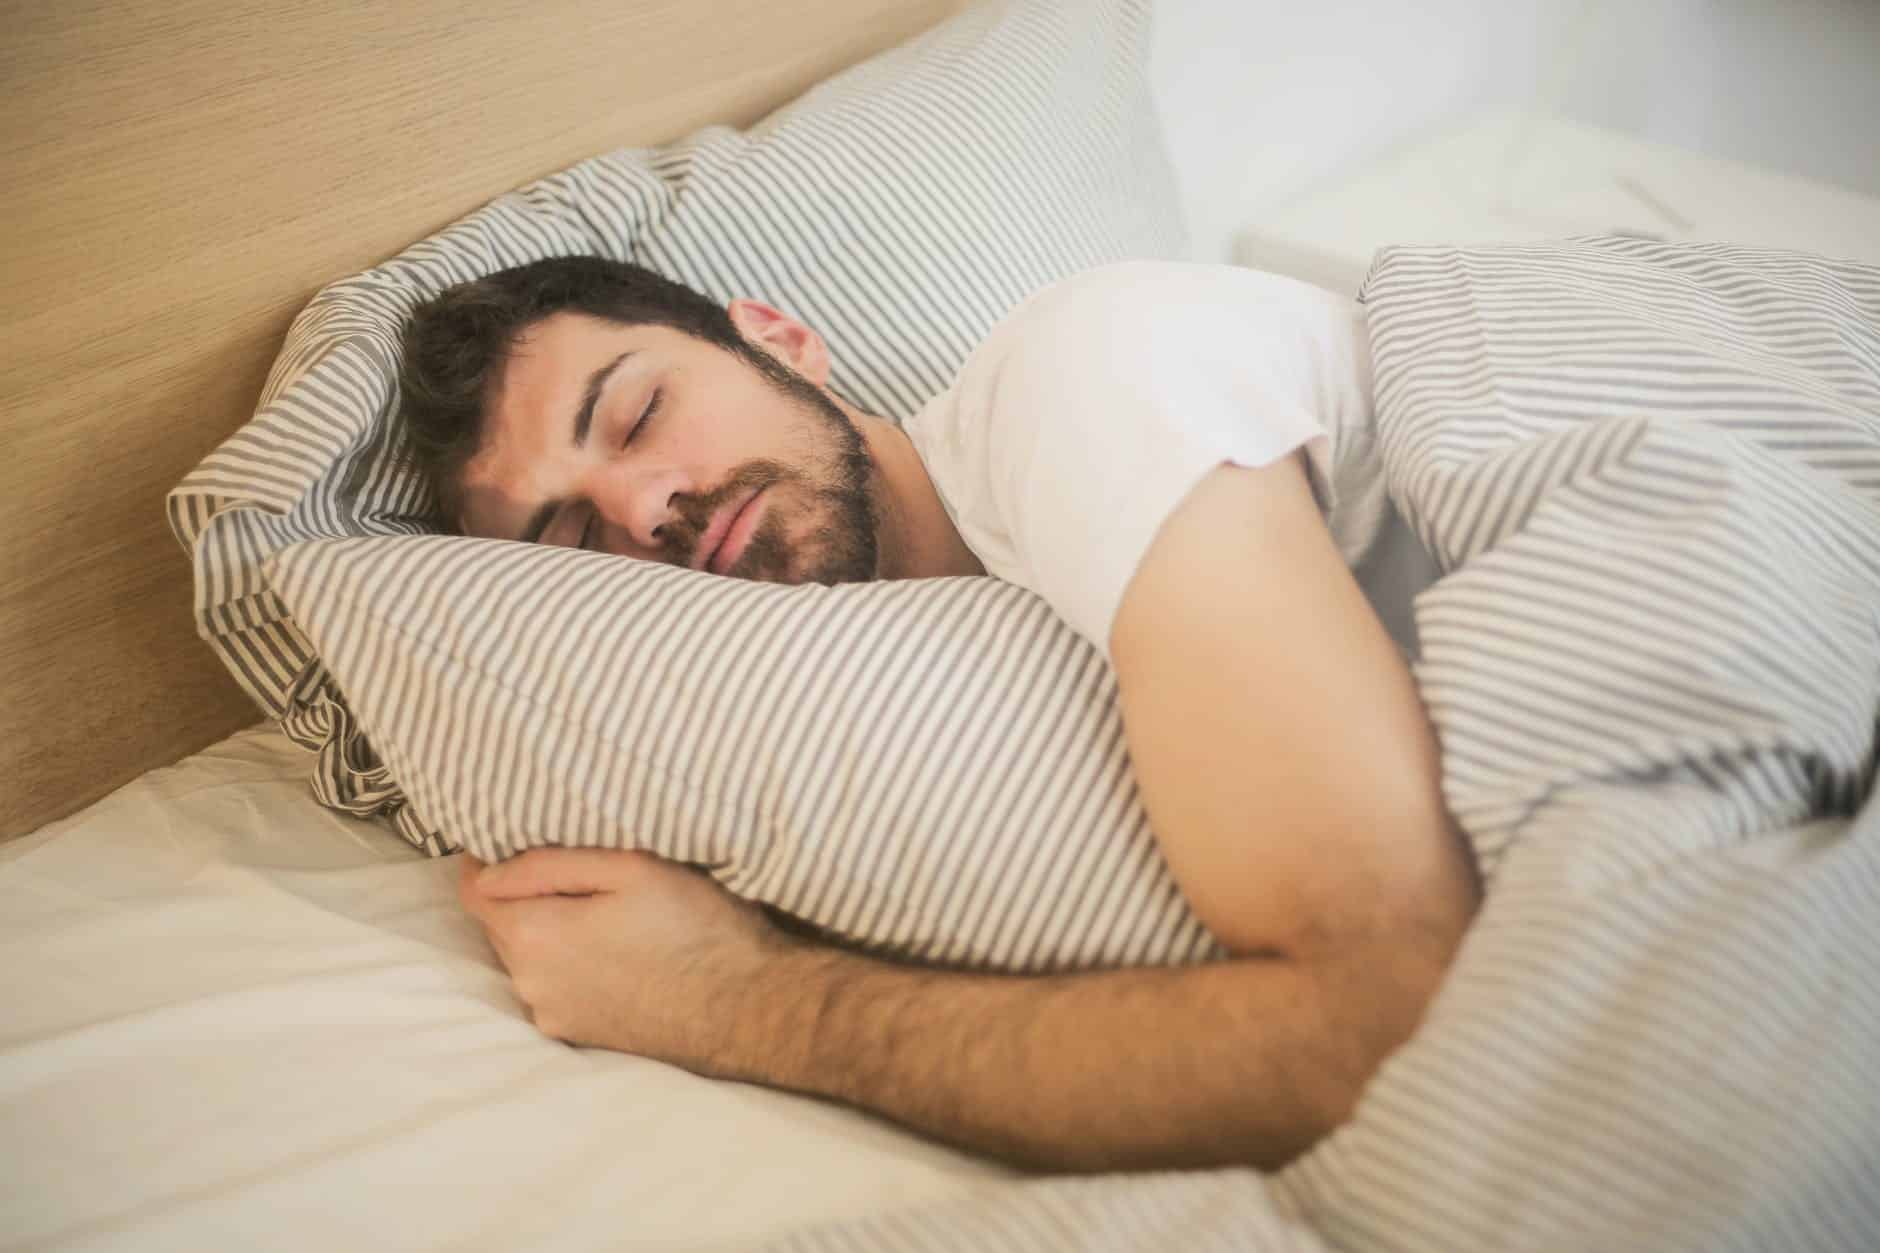 A man sleeping while holding a pillow in bed.